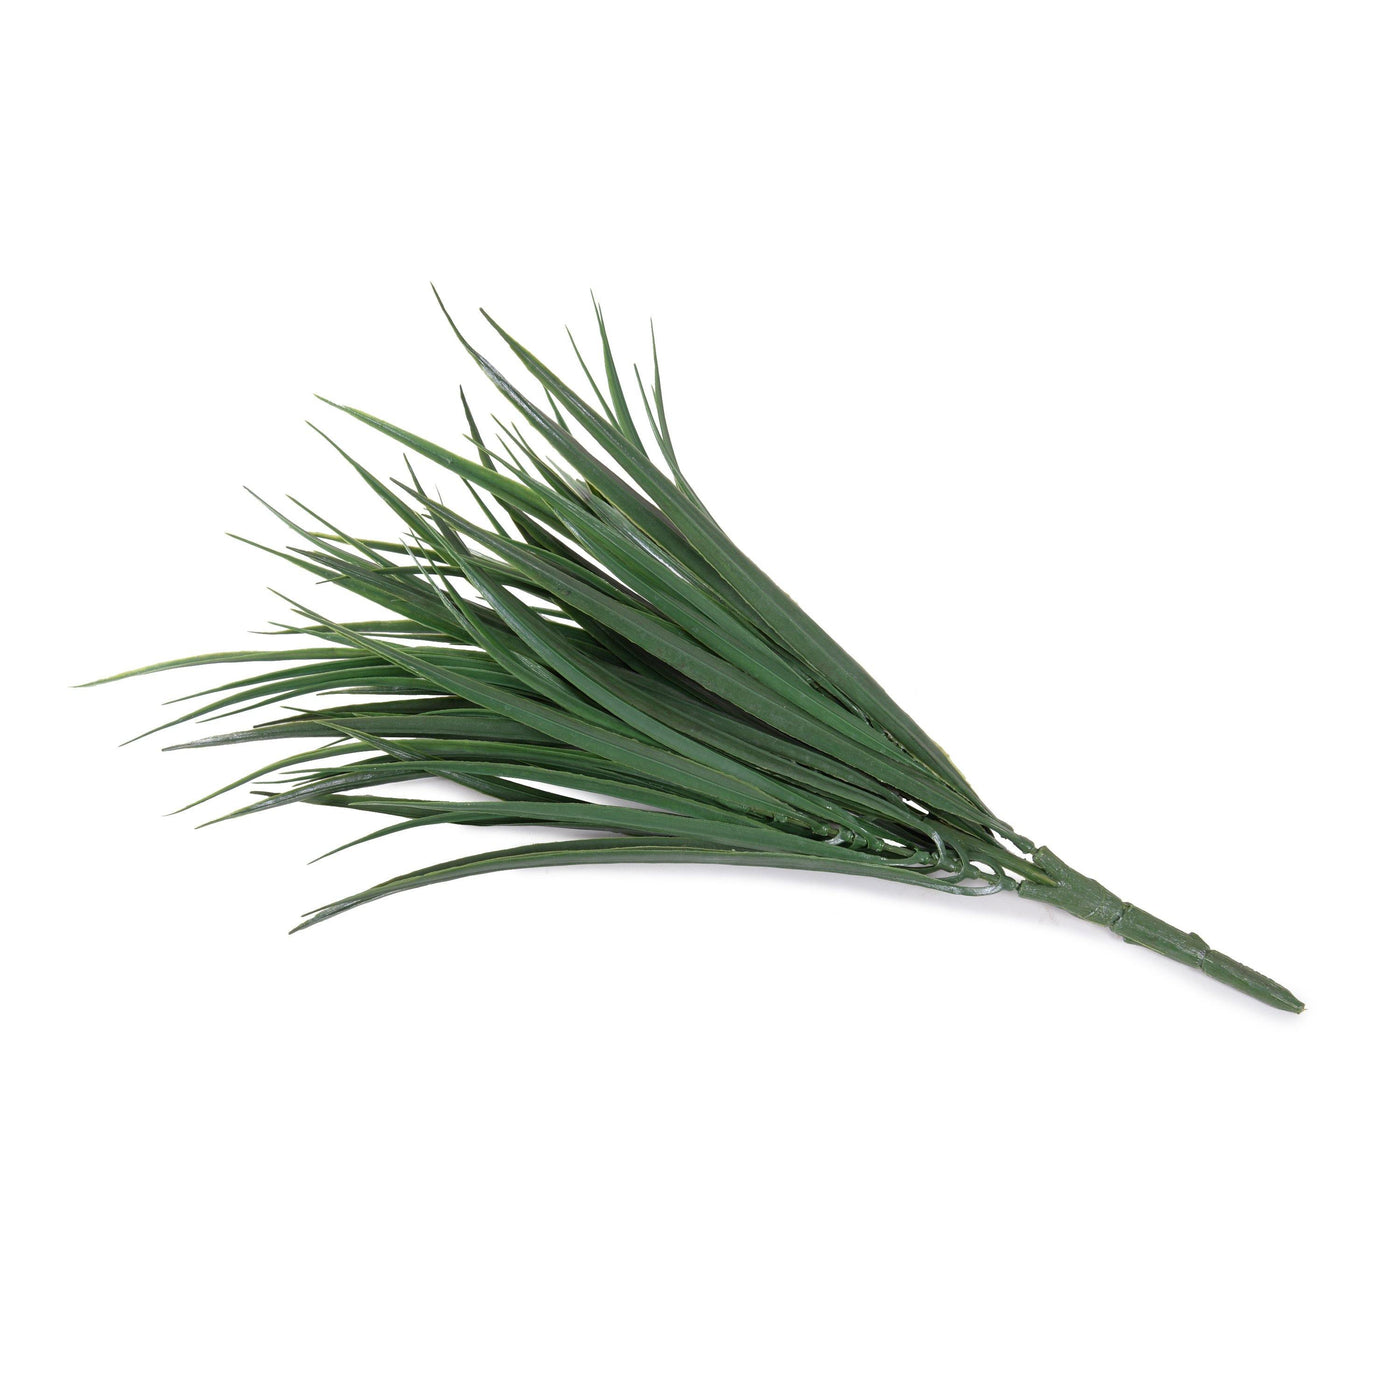 Wholesale Artificial Ornamental Grass Spray, Green Liriope Outdoor 16 Inches Long - Enduraleaf by New Growth Designs